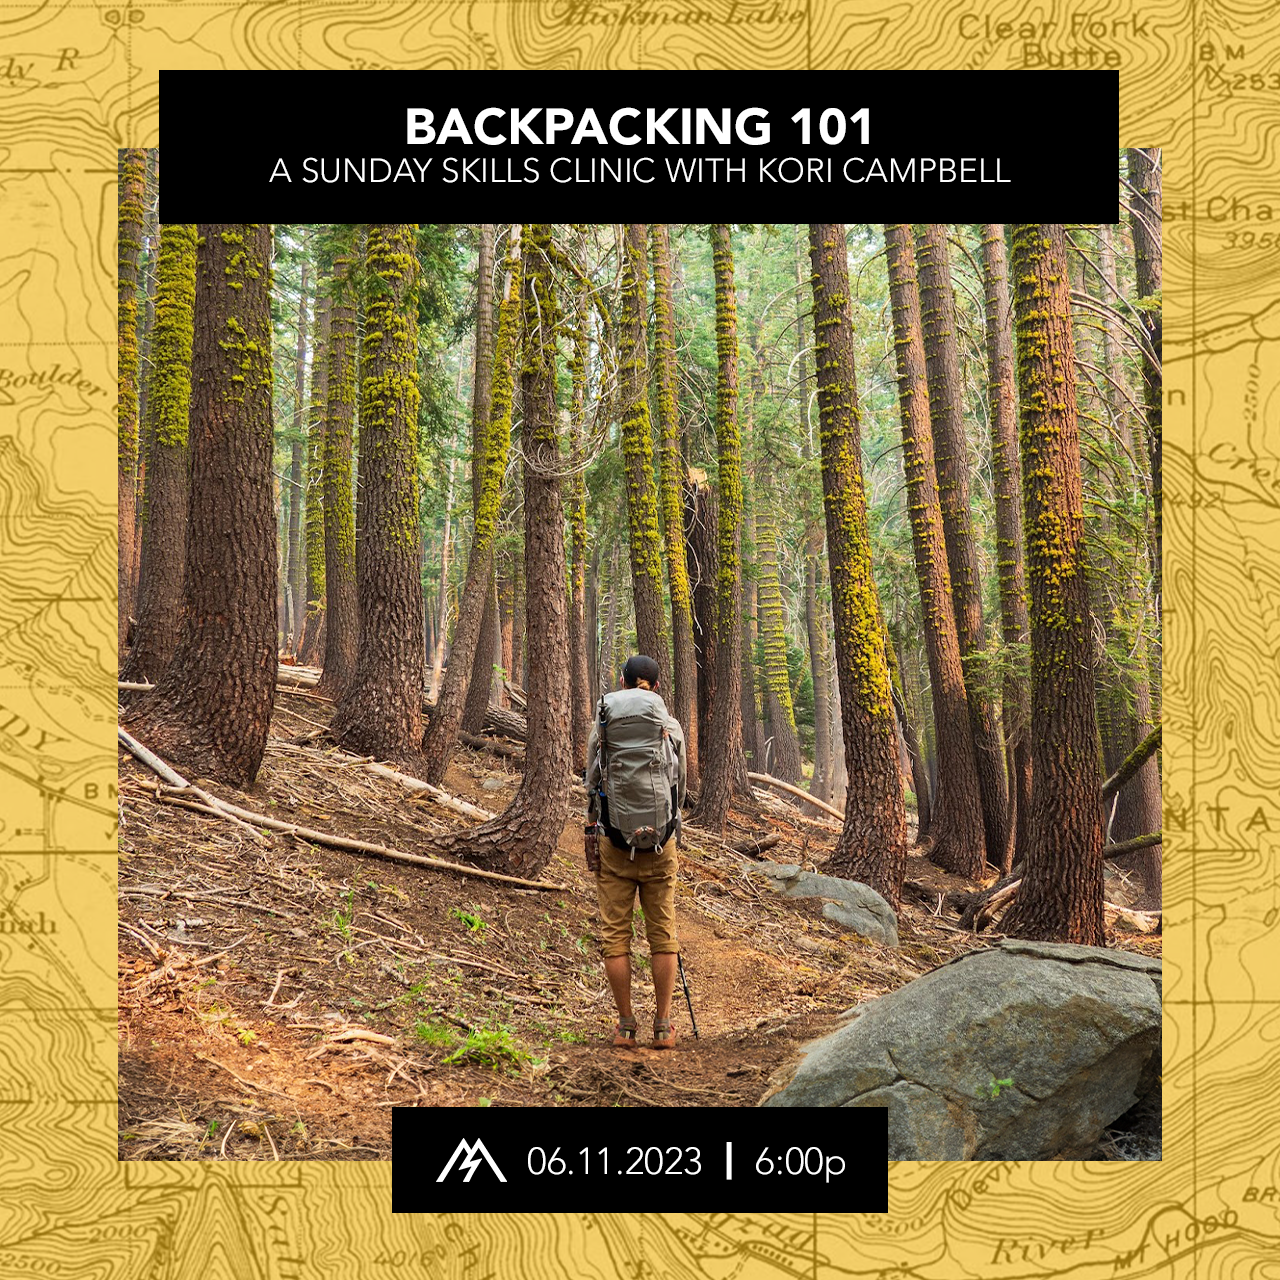 Backpacking 101: A Sunday Skills Clinic